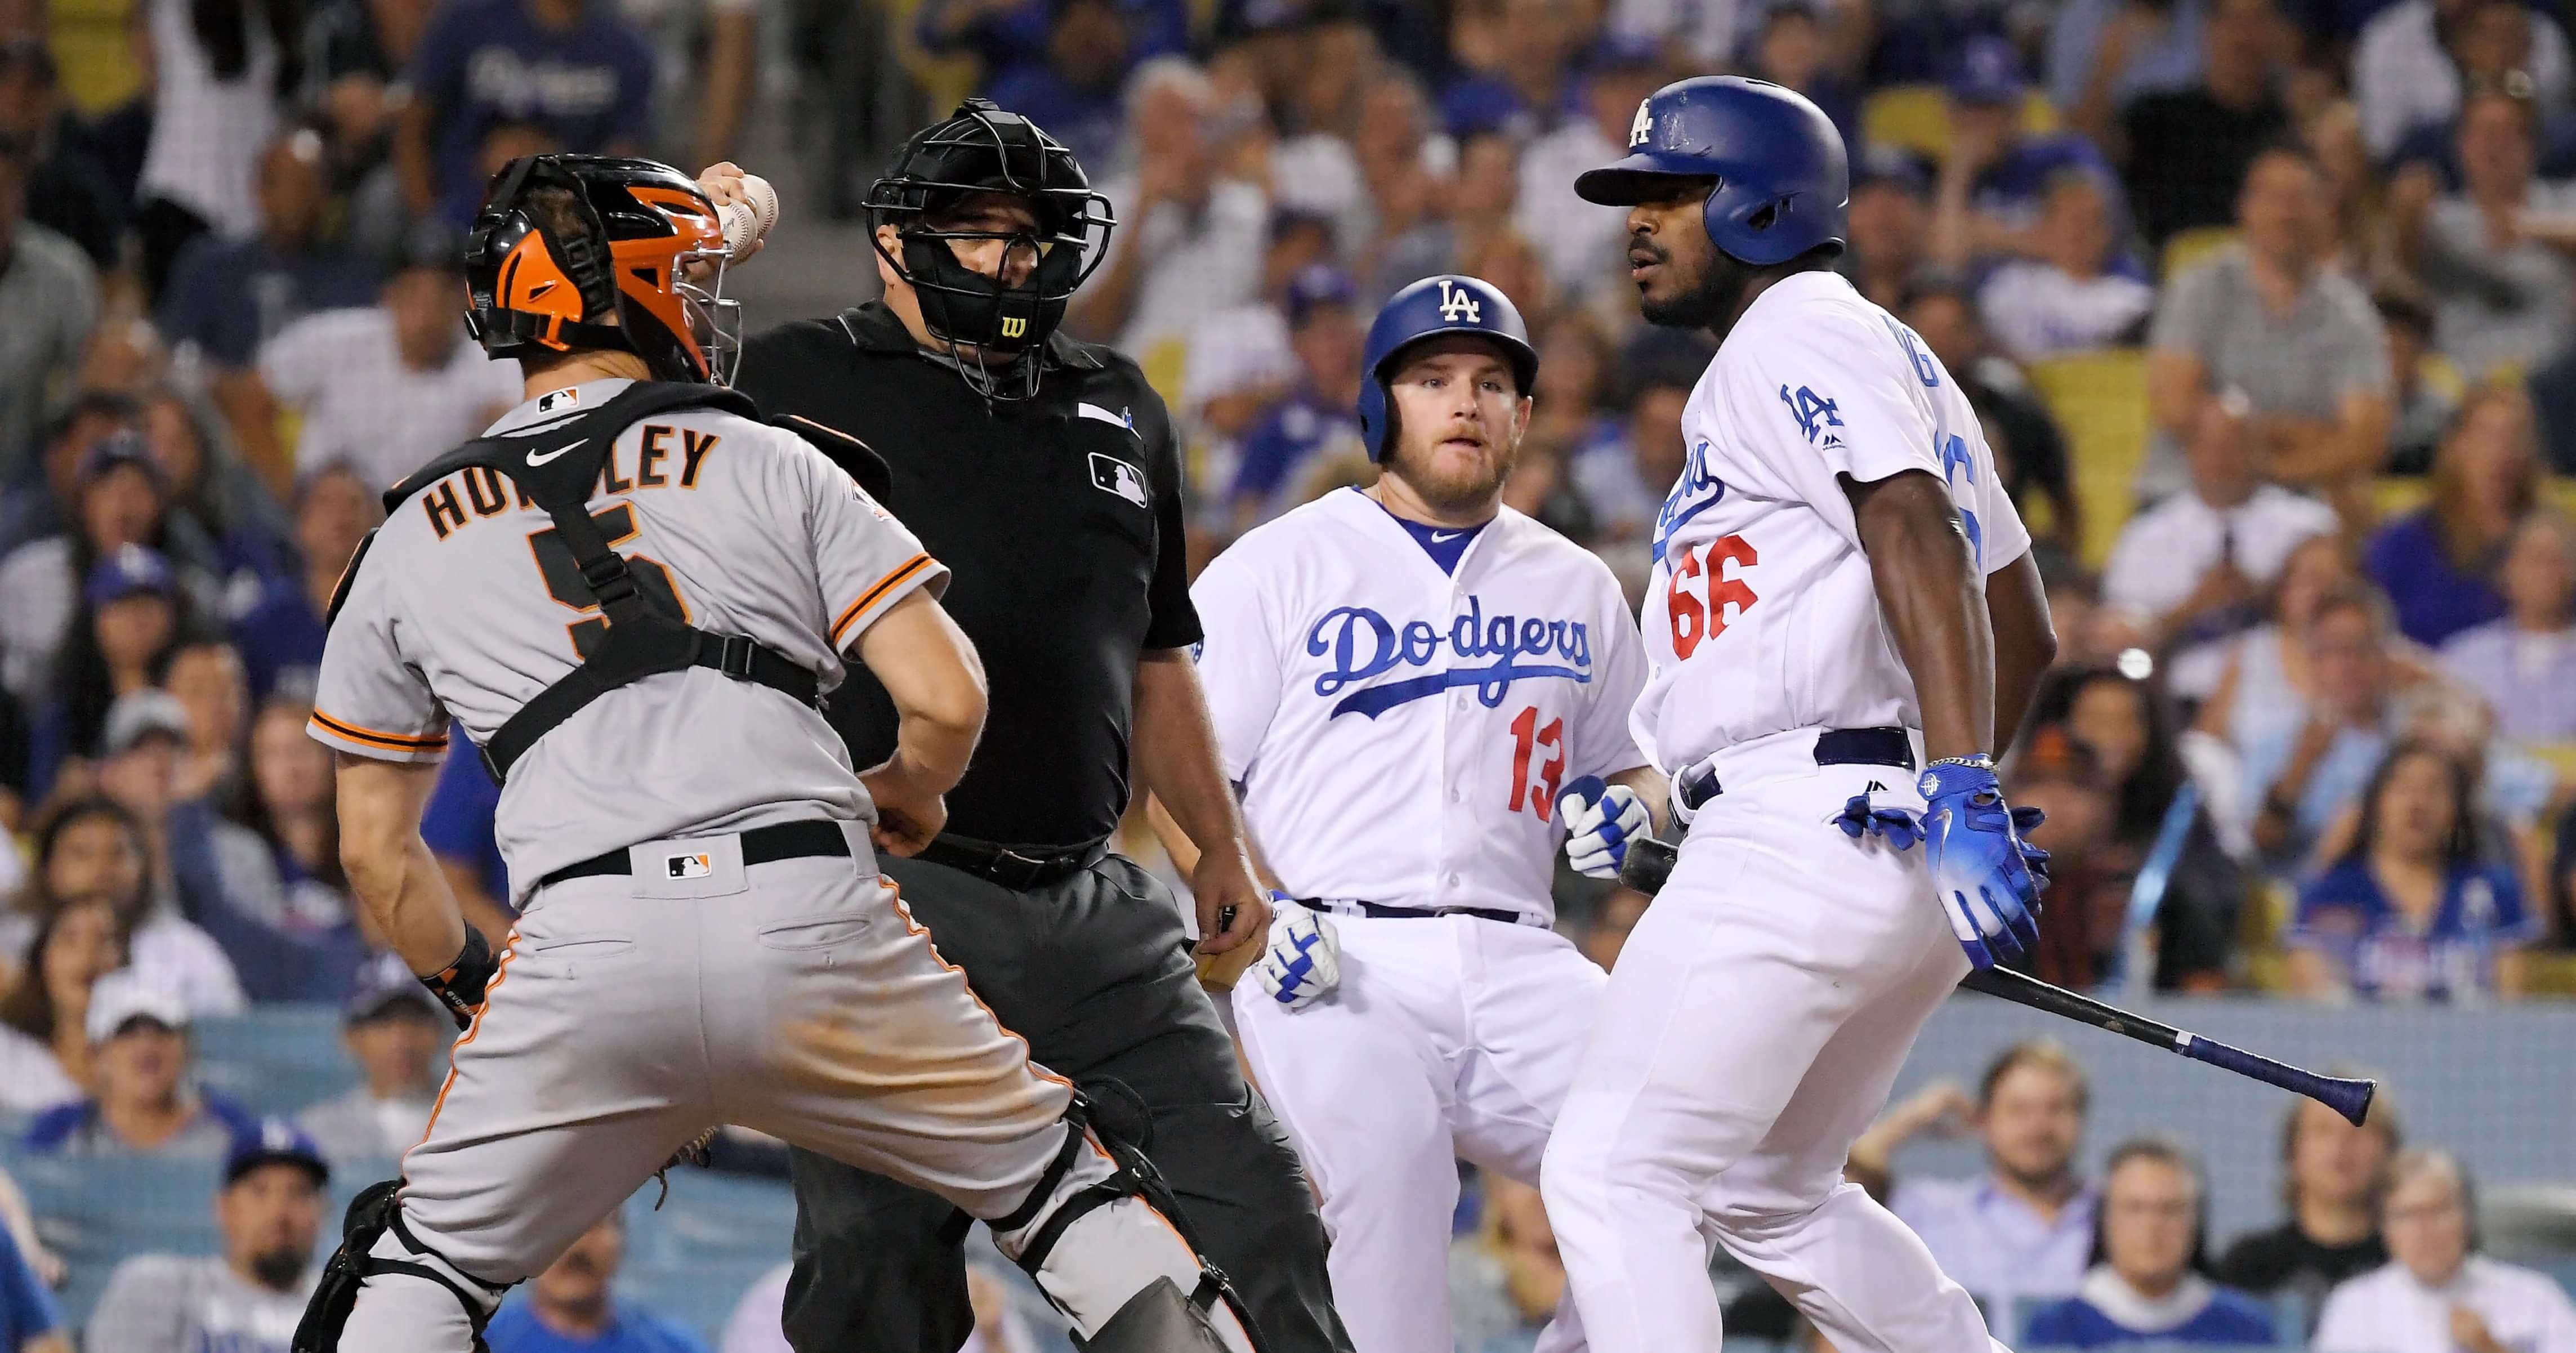 San Francisco Giants catcher Nick Hundley, left, reacts to being shoved by Los Angeles Dodgers' Yasiel Puig, right, as they argue while home plate umpire Eric Cooper, second from left, gets between them and Max Muncy runs in during the seventh inning of a baseball game, Tuesday, Aug. 14, 2018, in Los Angeles.